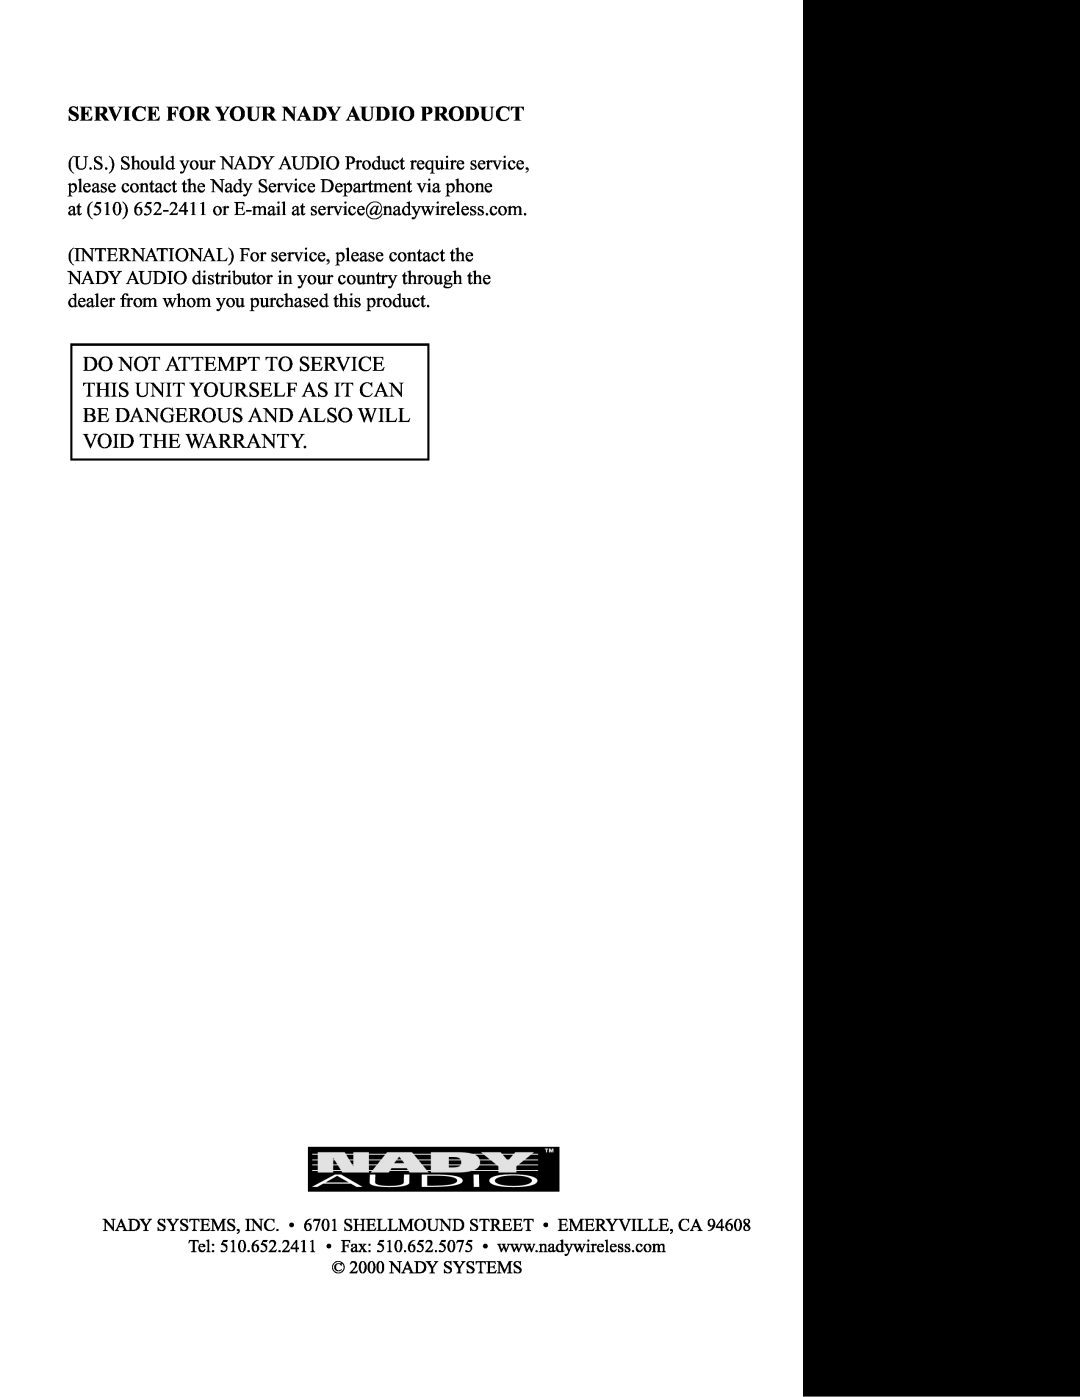 Nady Systems SRA 2150 manual Service For Your Nady Audio Product, Do Not Attempt To Service, This Unit Yourself As It Can 